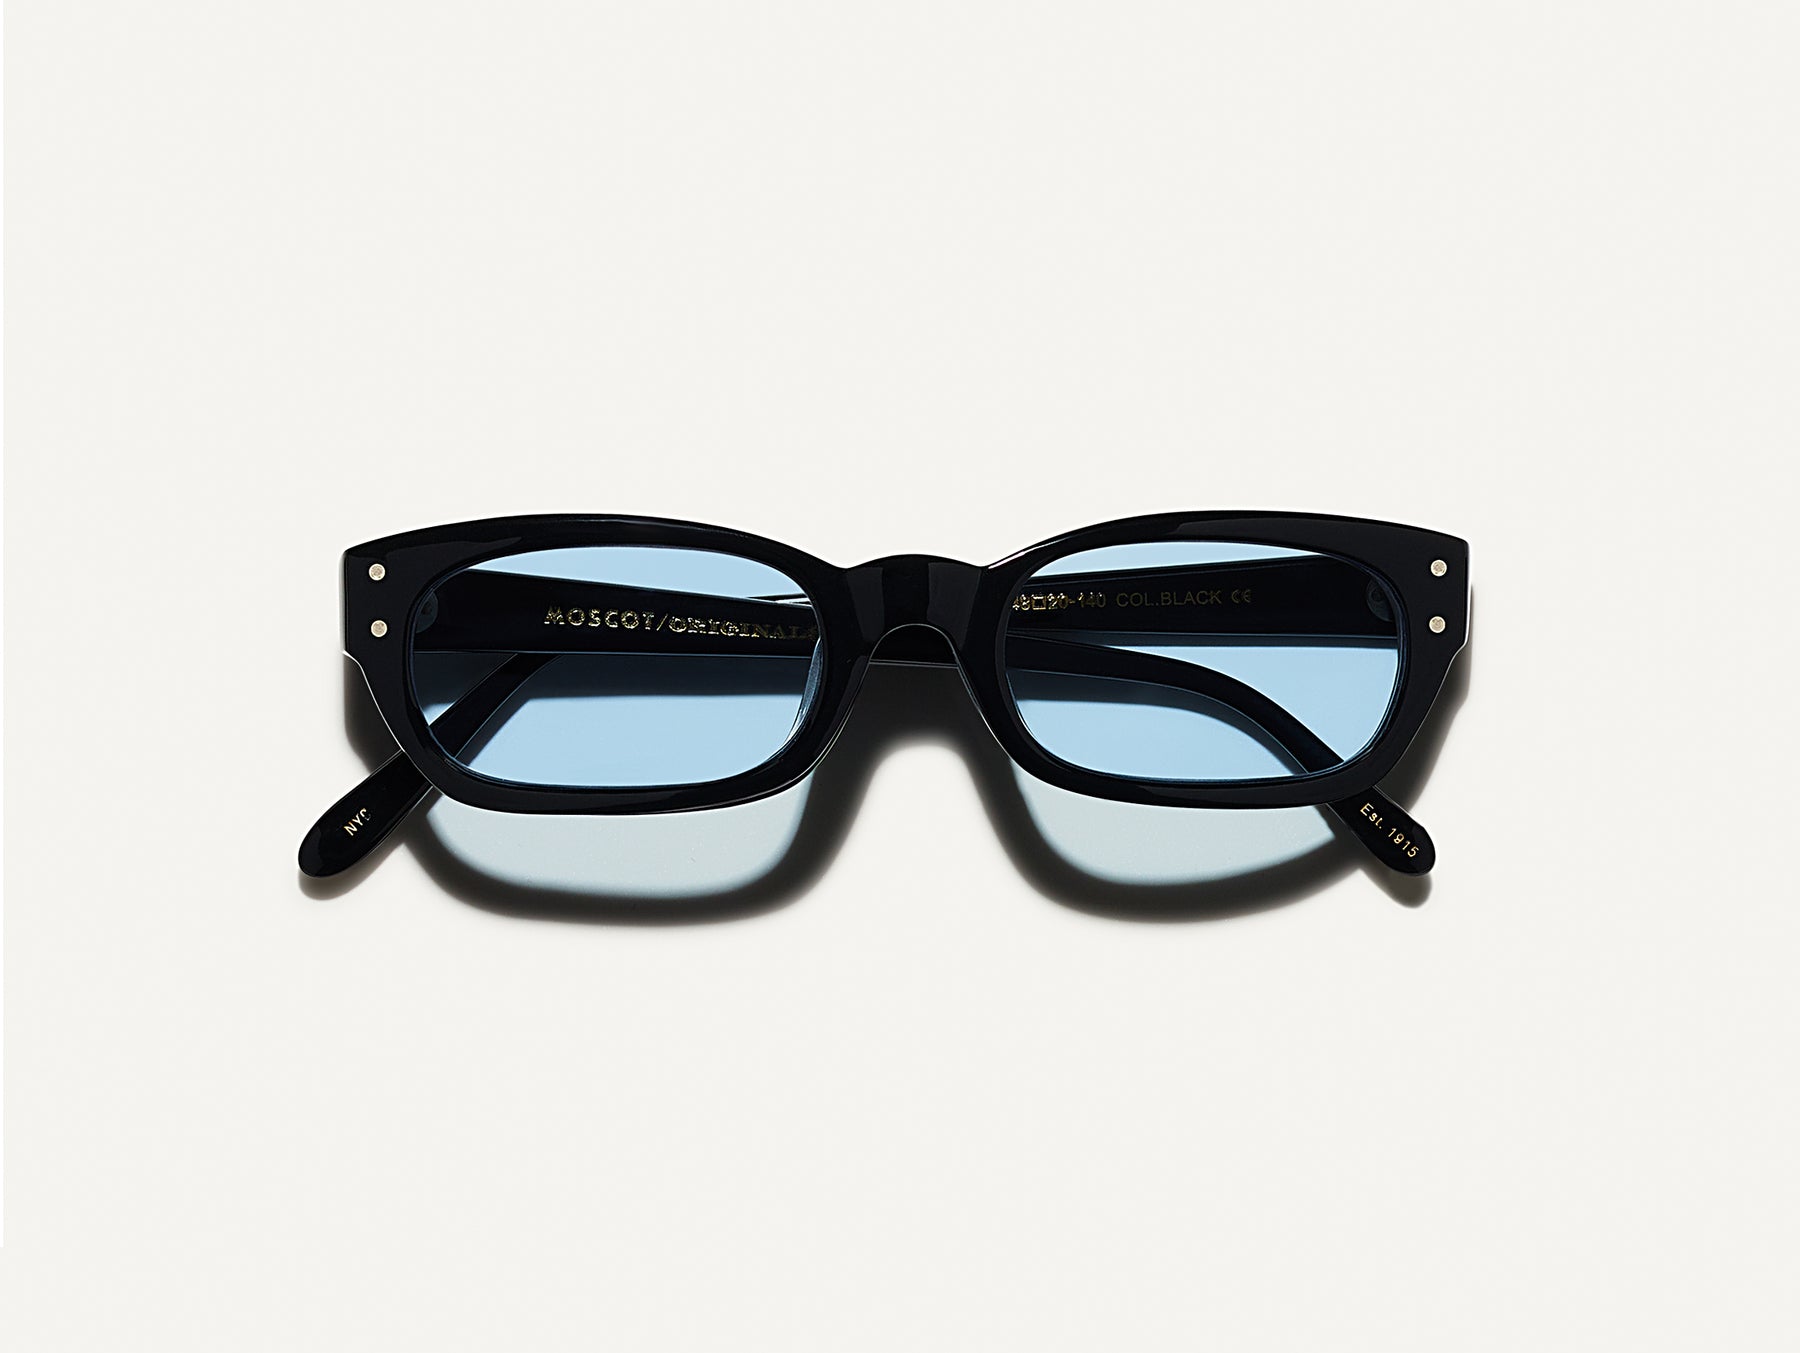 The BISSLE SUN in Black with Bel Air Blue Tinted Lenses